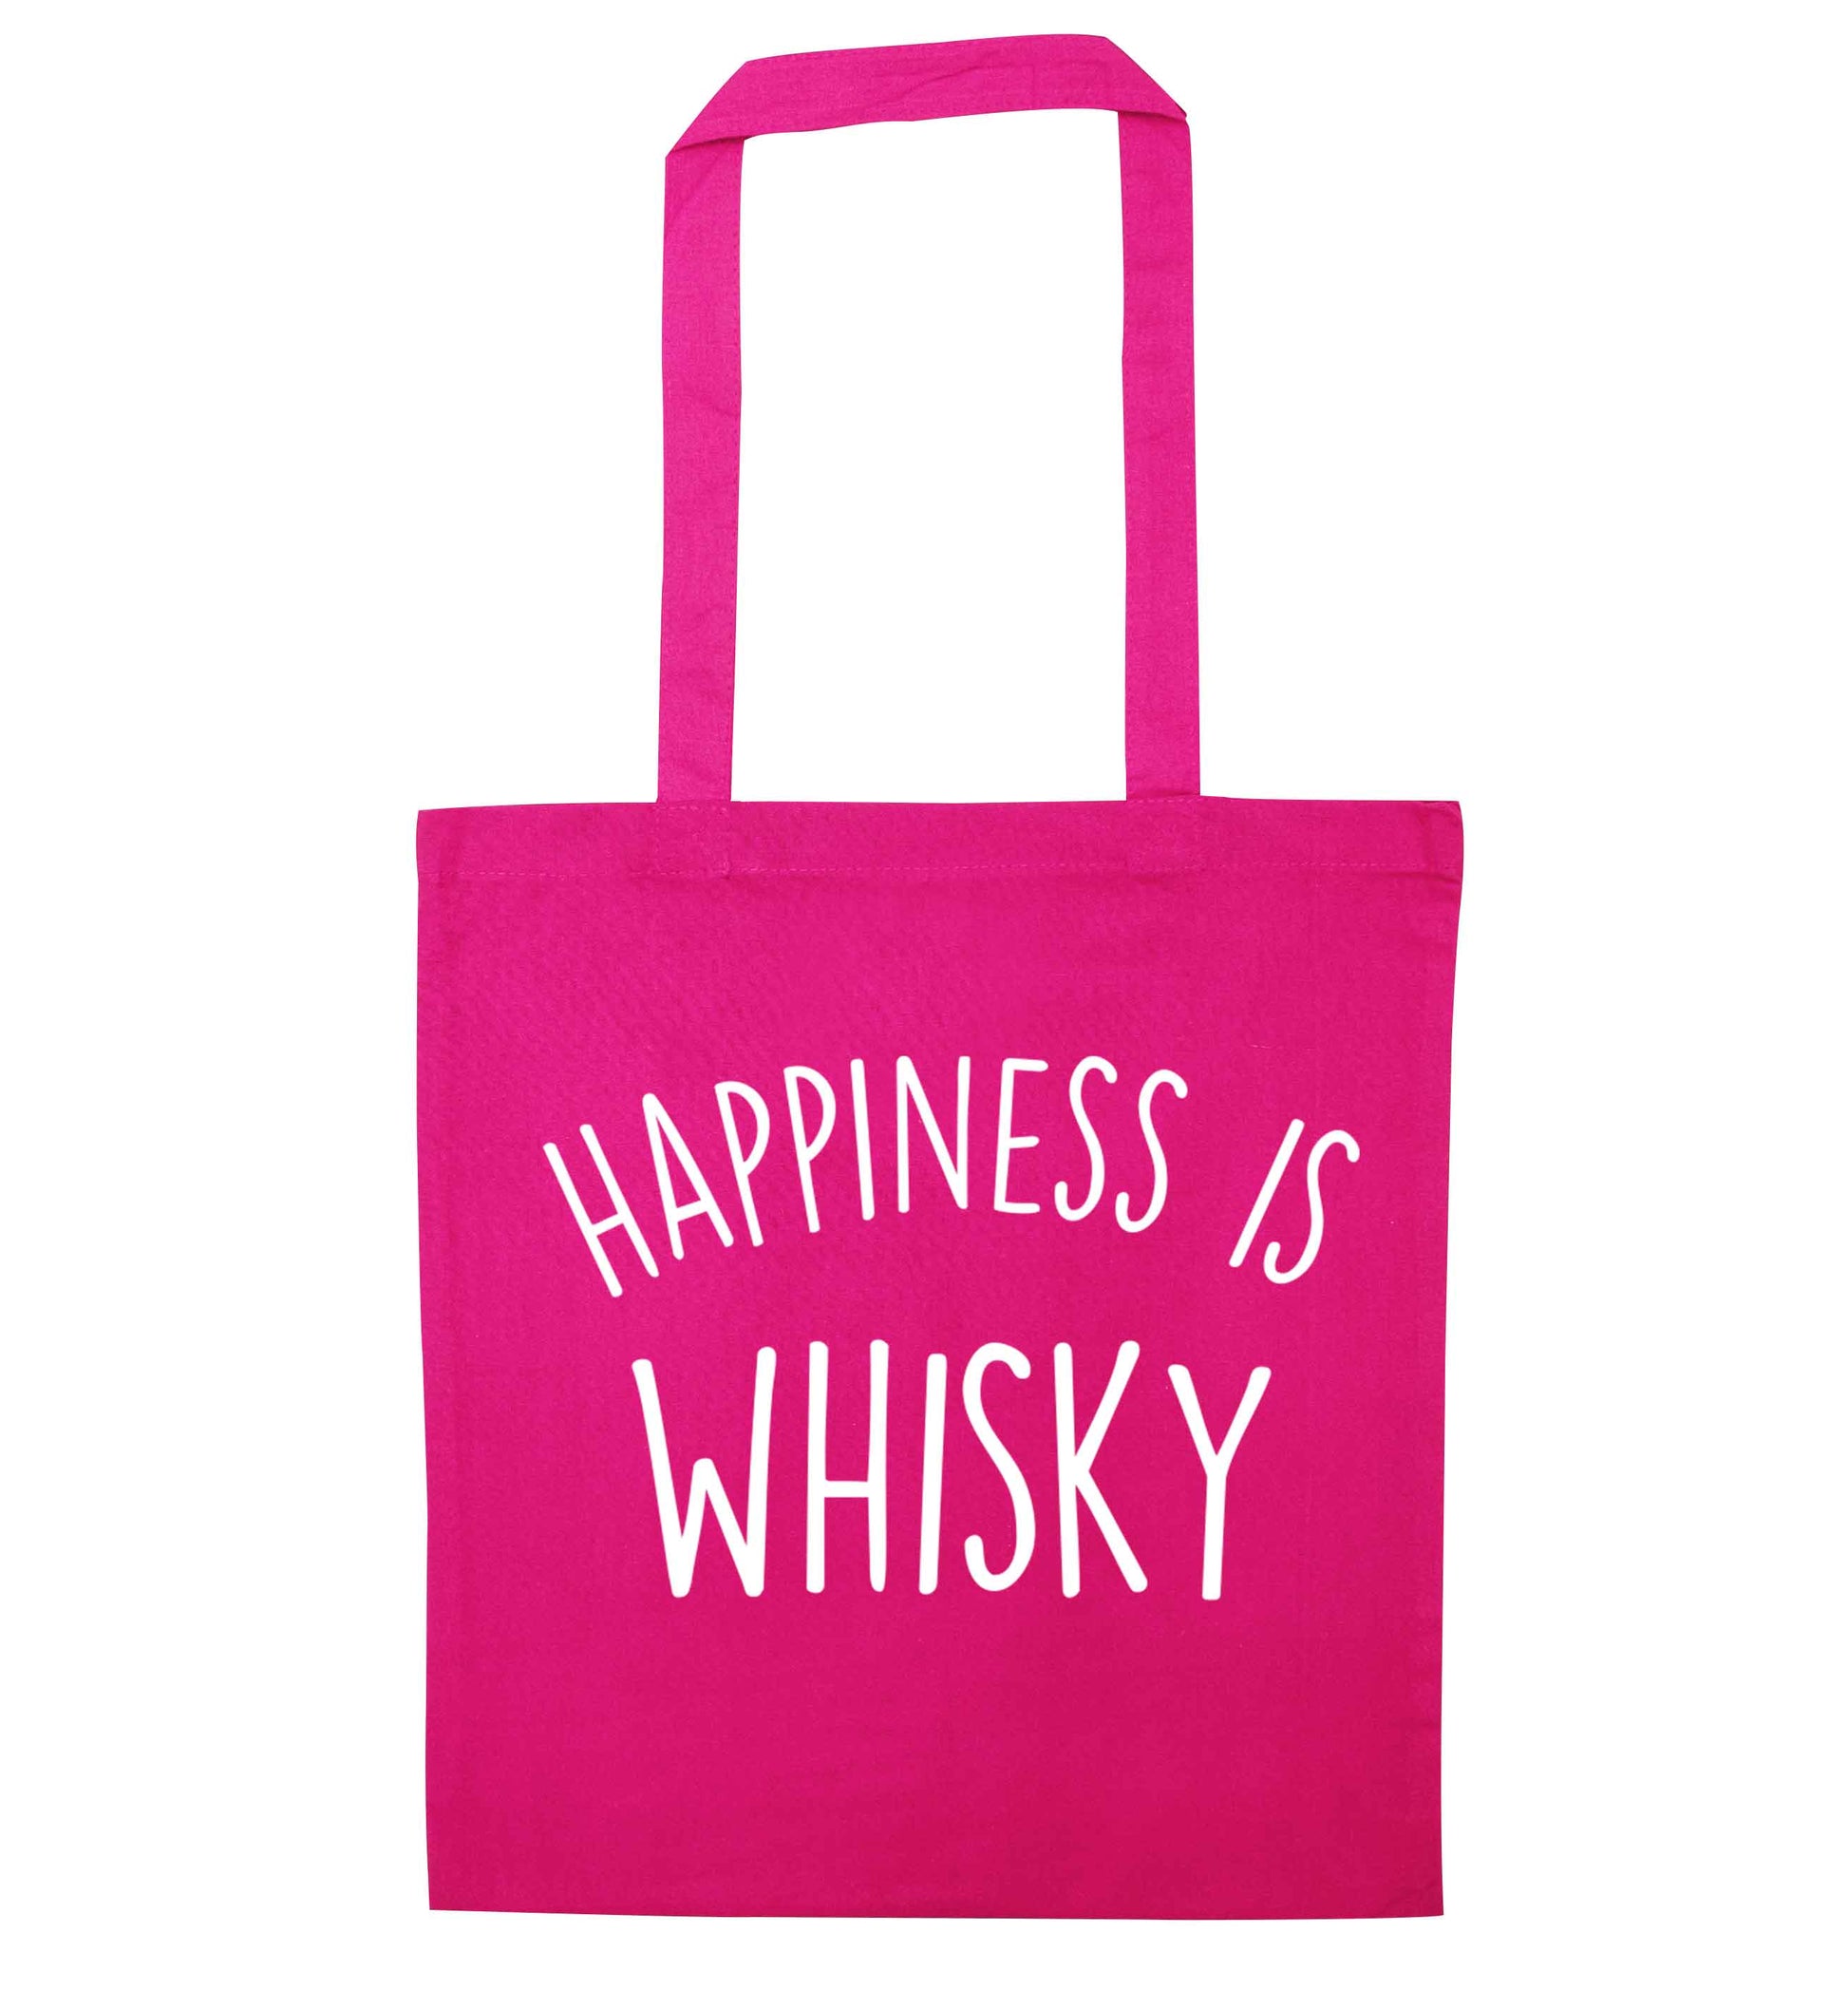 Happiness is whisky pink tote bag